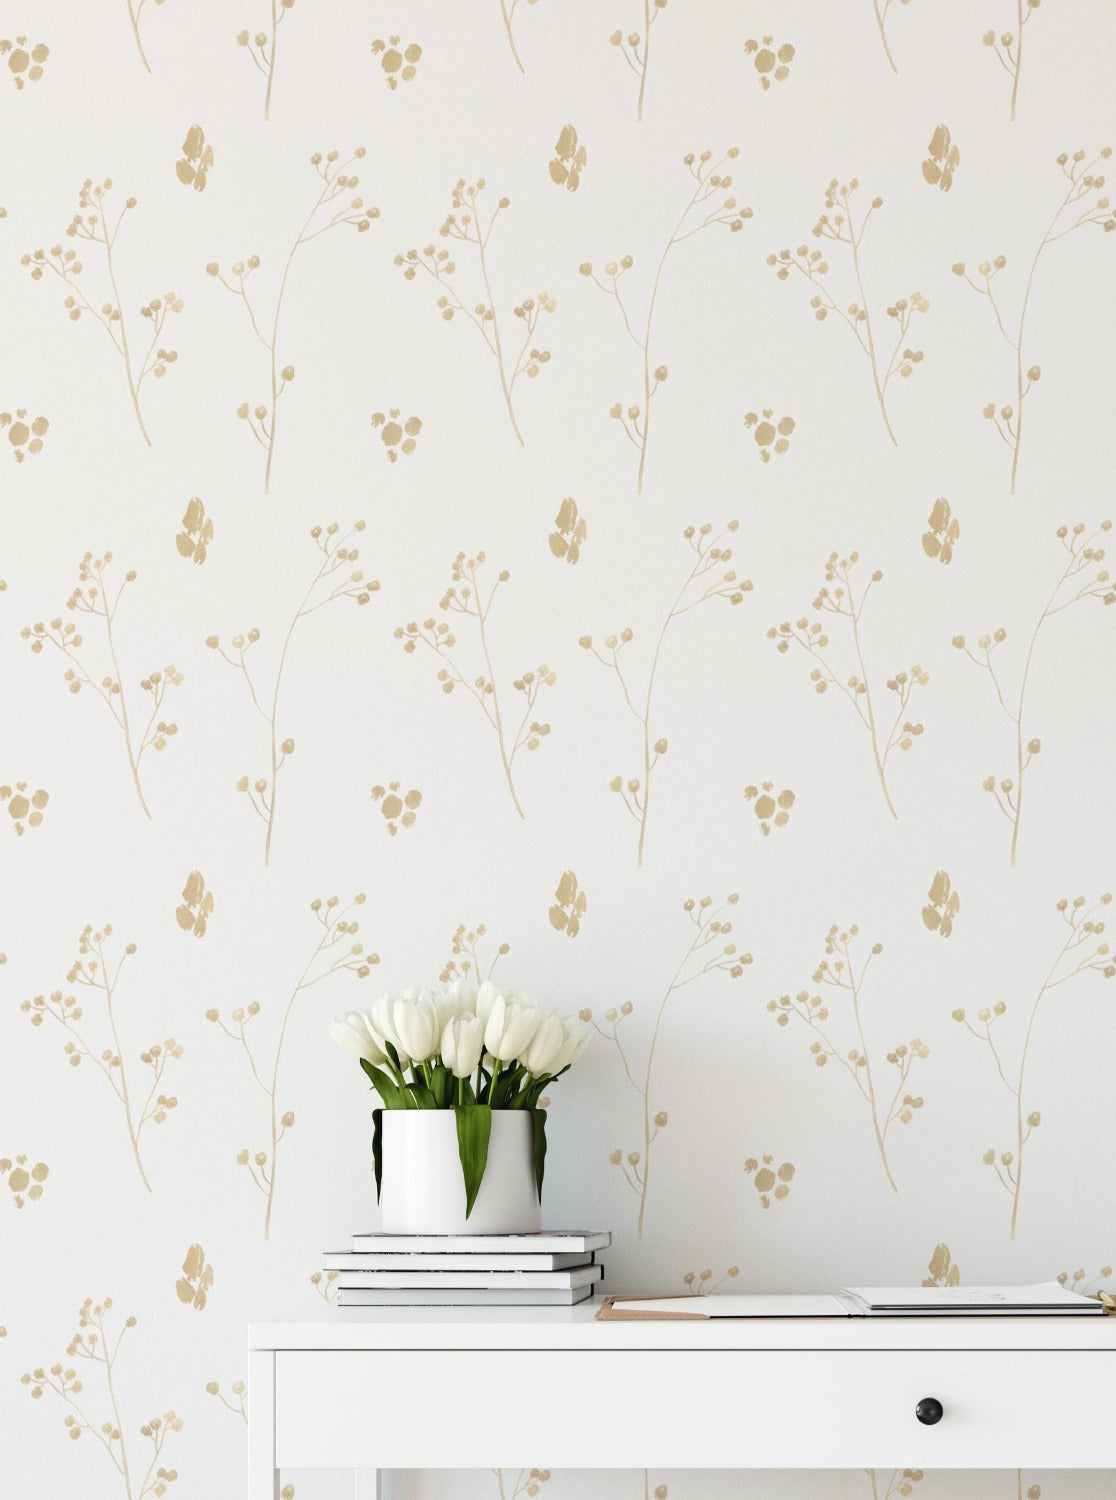 A sophisticated home office setup showcasing the Gold Collection Wallpaper III, with its understated golden floral pattern providing a luxurious backdrop to a clean, white desk and chair, accented by a bouquet of white tulips and a minimalist desk lamp.